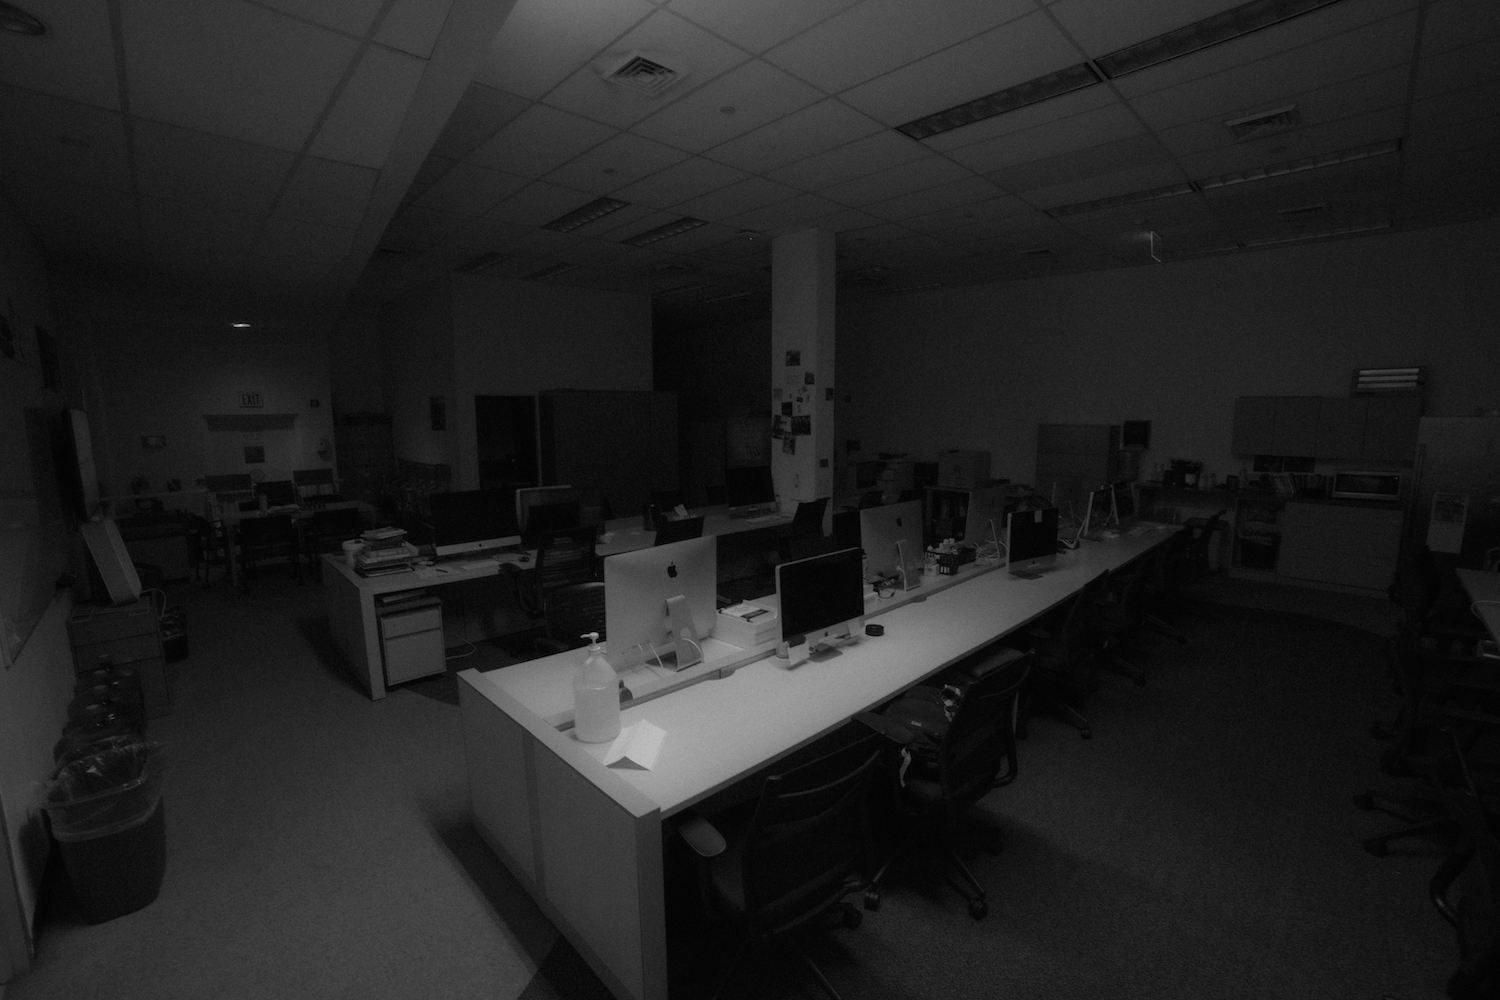 An empty W.S.N. office with lights off.